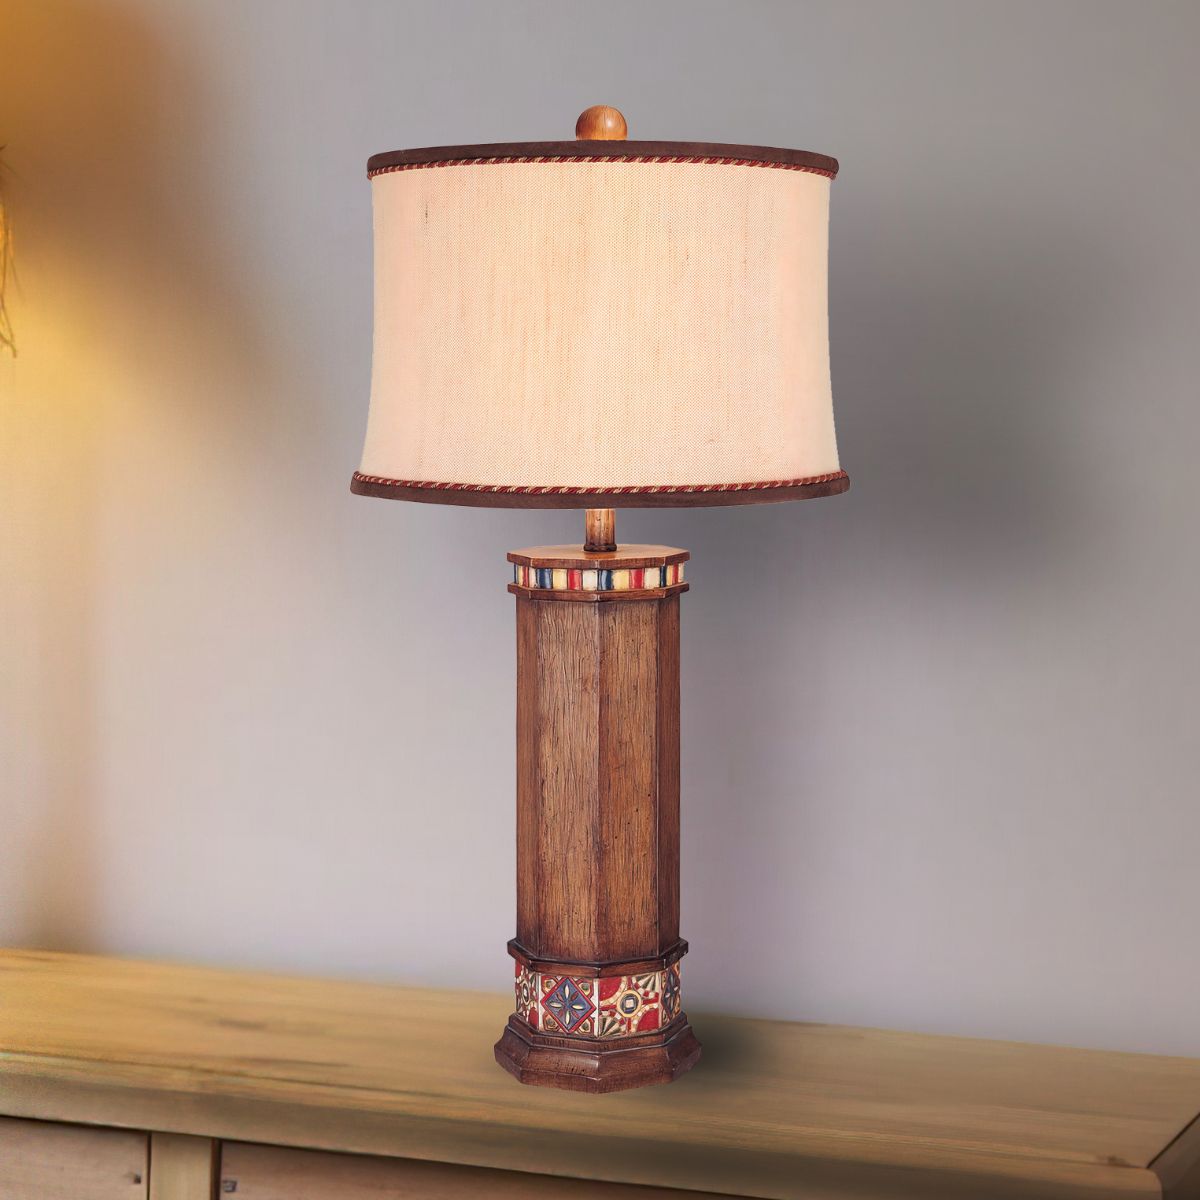 Ambience 1 Light Table Lamp Hand Painted Wood Finish